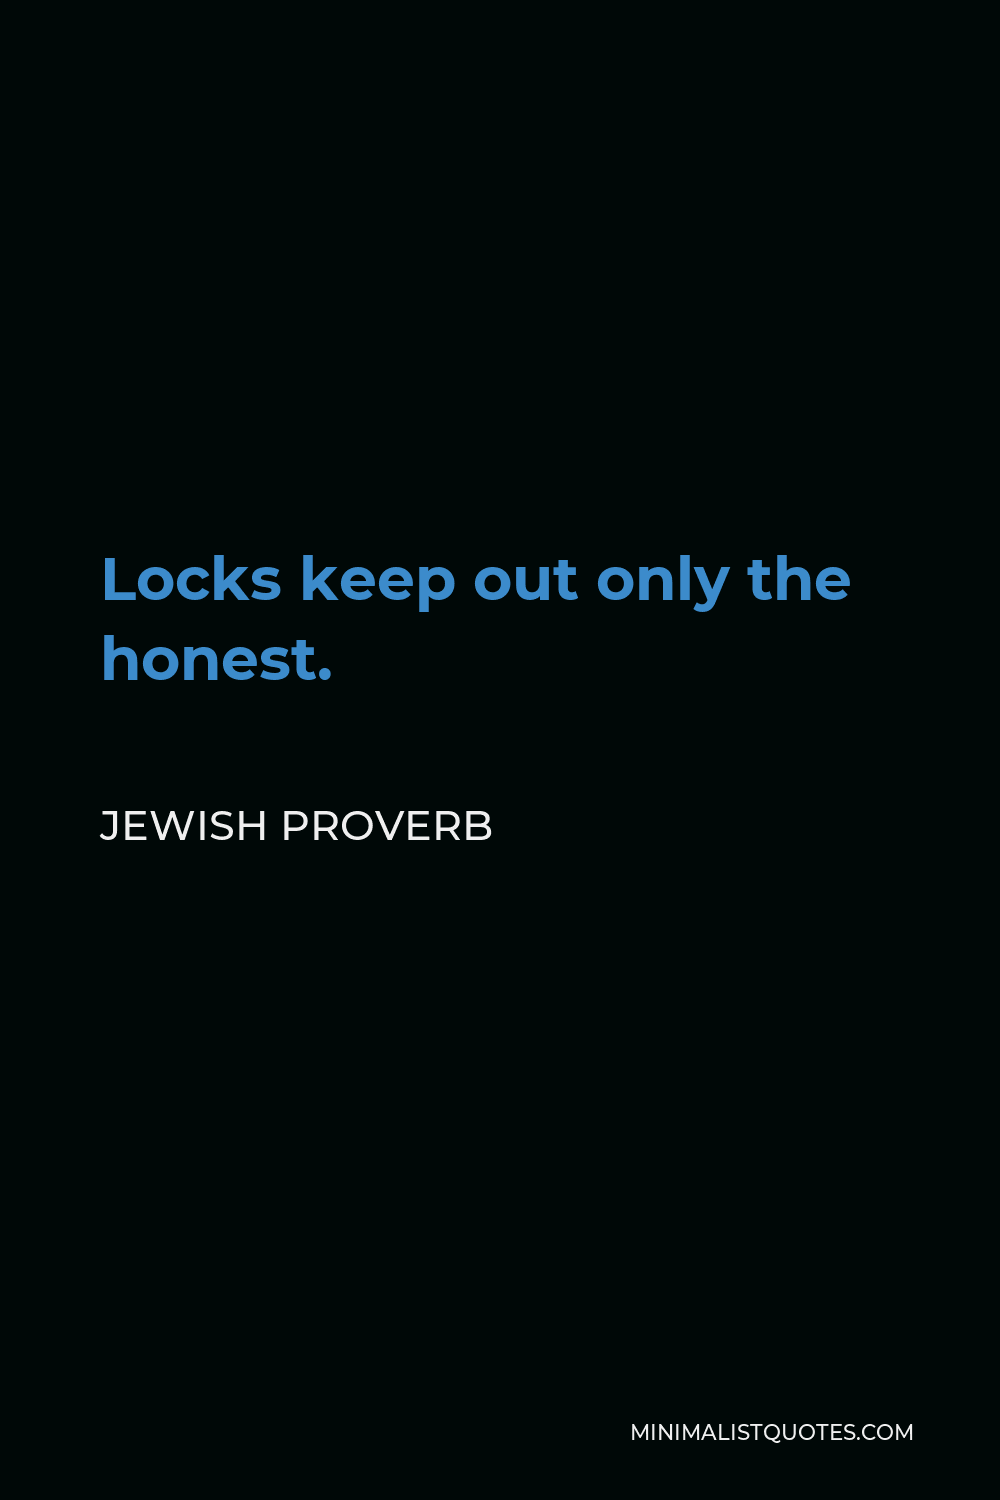 Jewish Proverb Quote - Locks keep out only the honest.